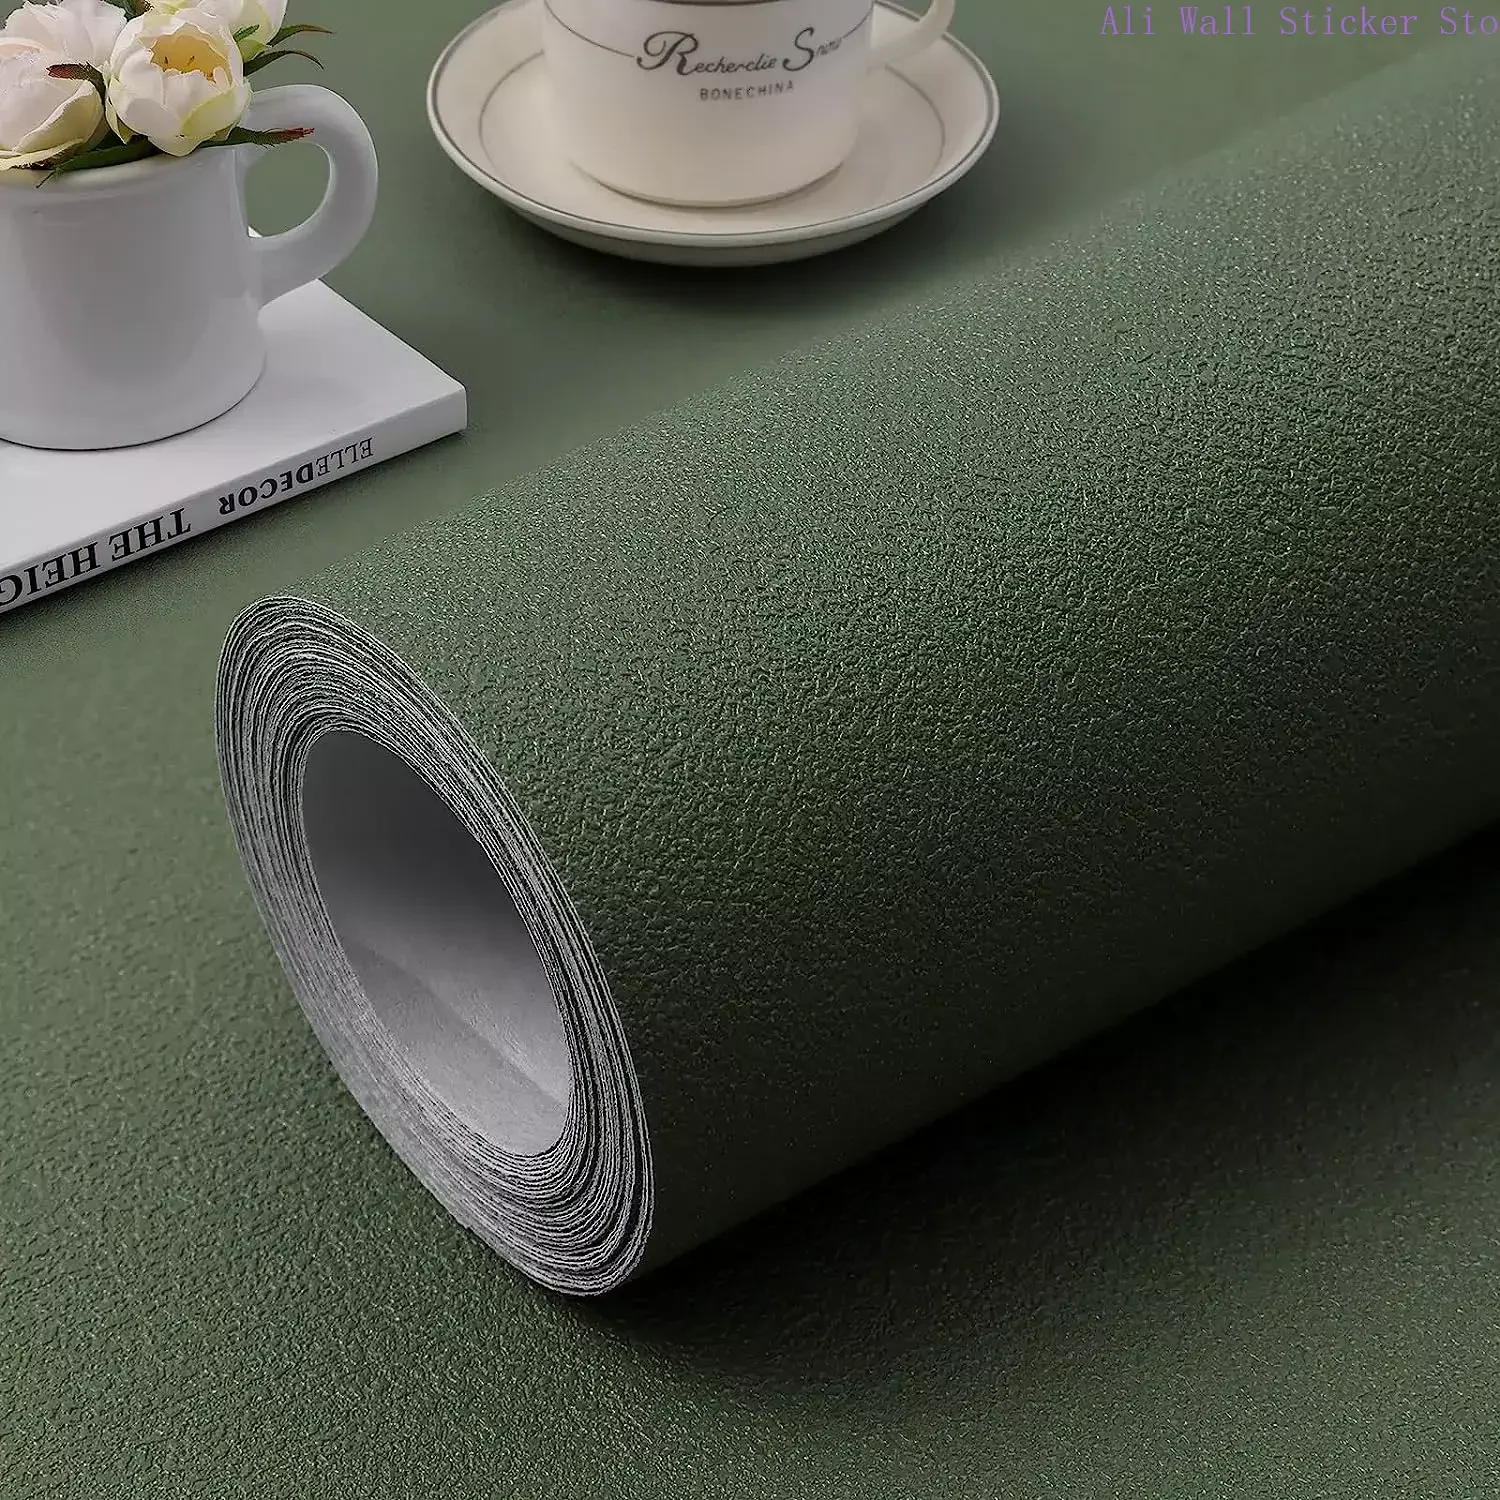 Green Wallpaper Self Adhesive and Removable Vinyl 3D Film Stick Paper To Apply Wall Home Decorative Liner Table and Door Reform peel and stick wallpaper silver stripes geometric removable self adhesive wall stickers pvc film decorative shelf drawer liner